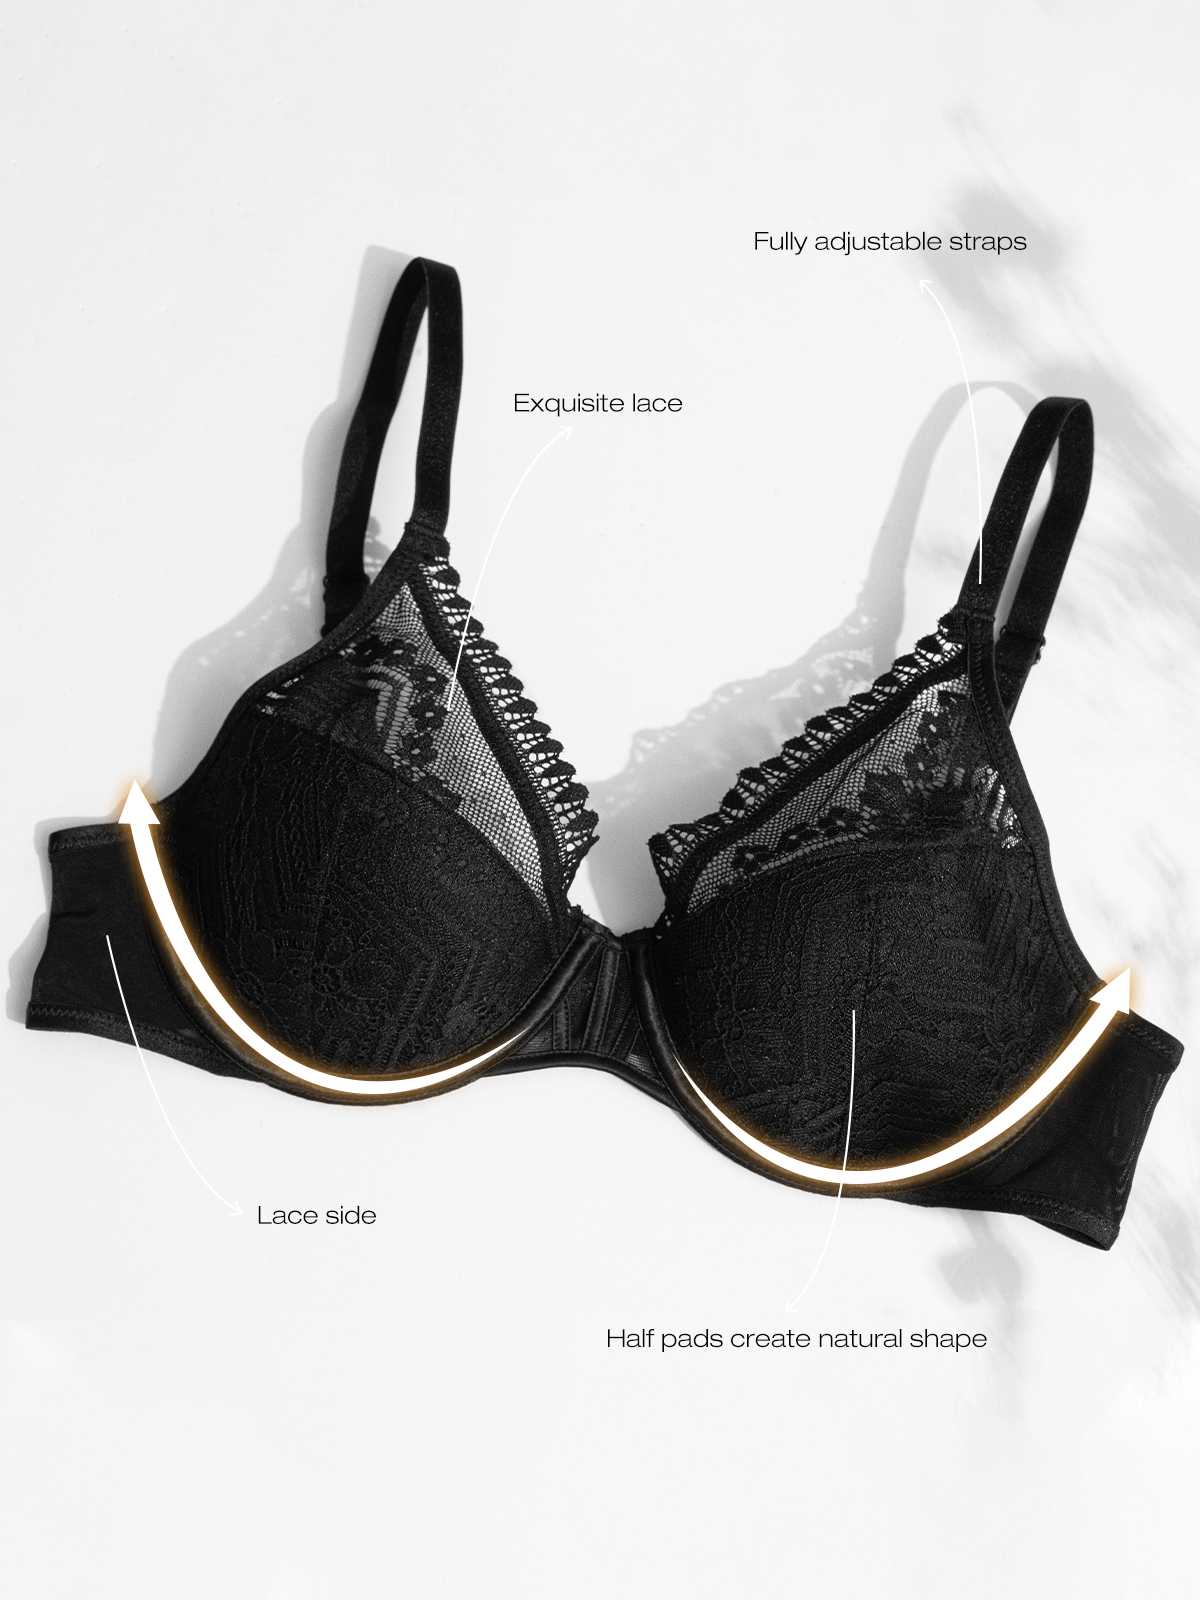 OUTLET PUSH UP bra with underwire with push up inserts